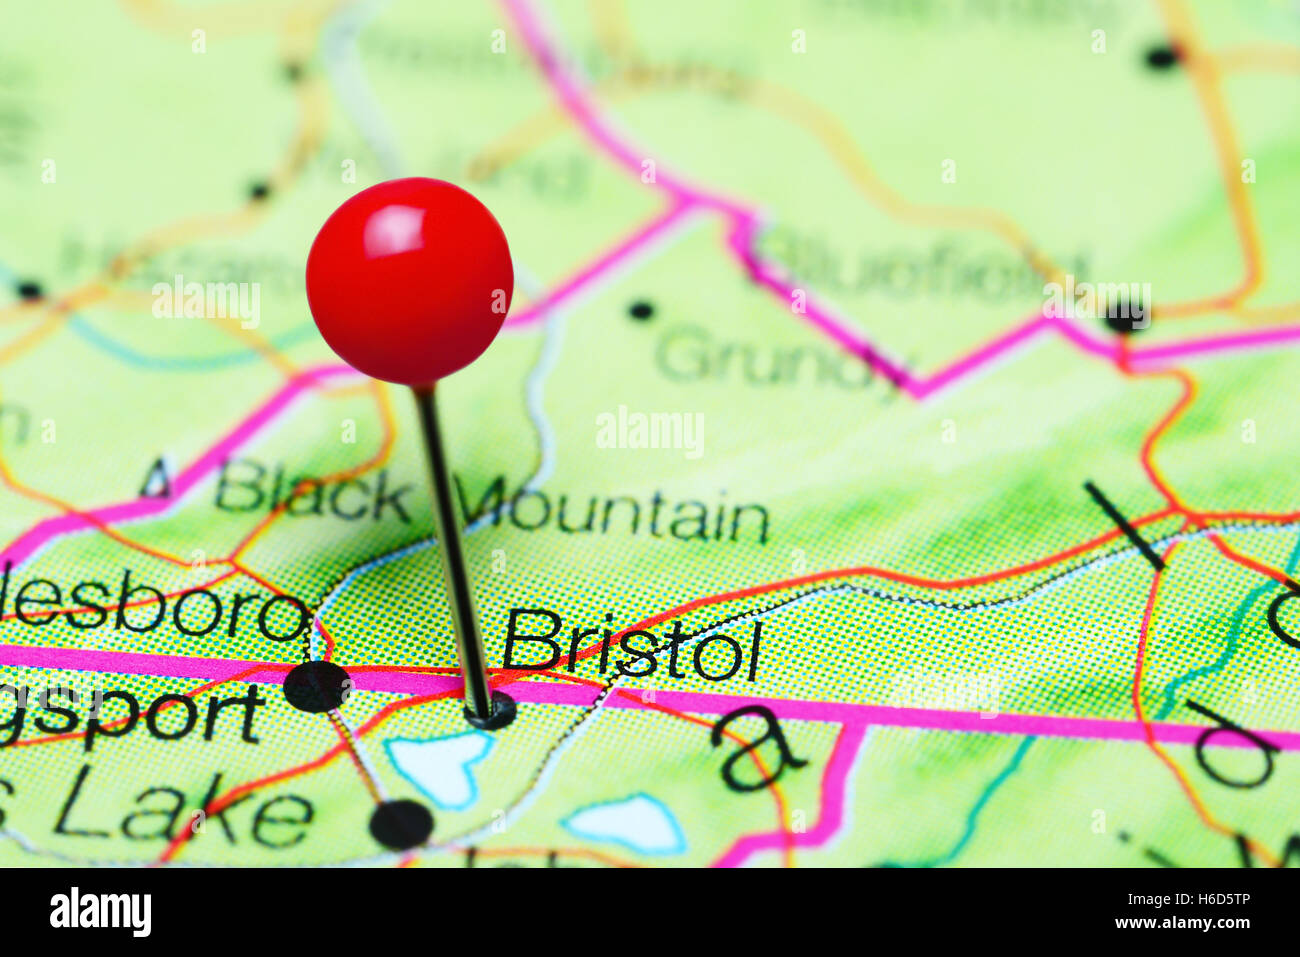 Bristol pinned on a map of Tennessee, USA Stock Photo